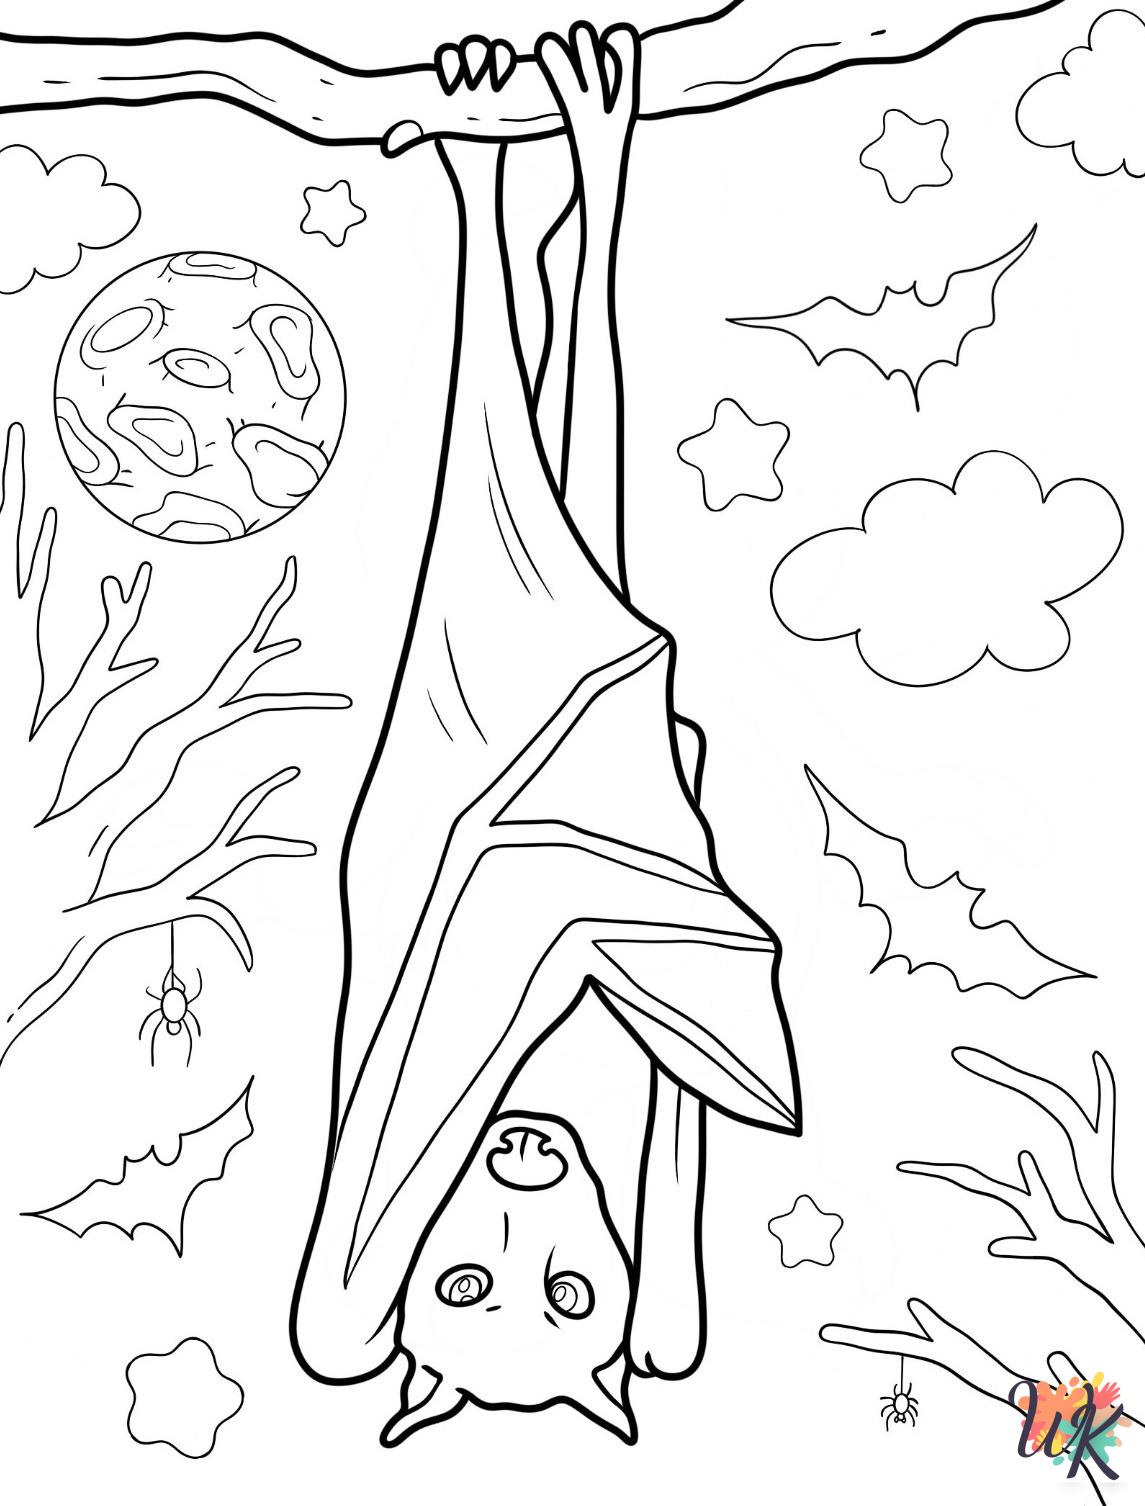 easy Bat coloring pages